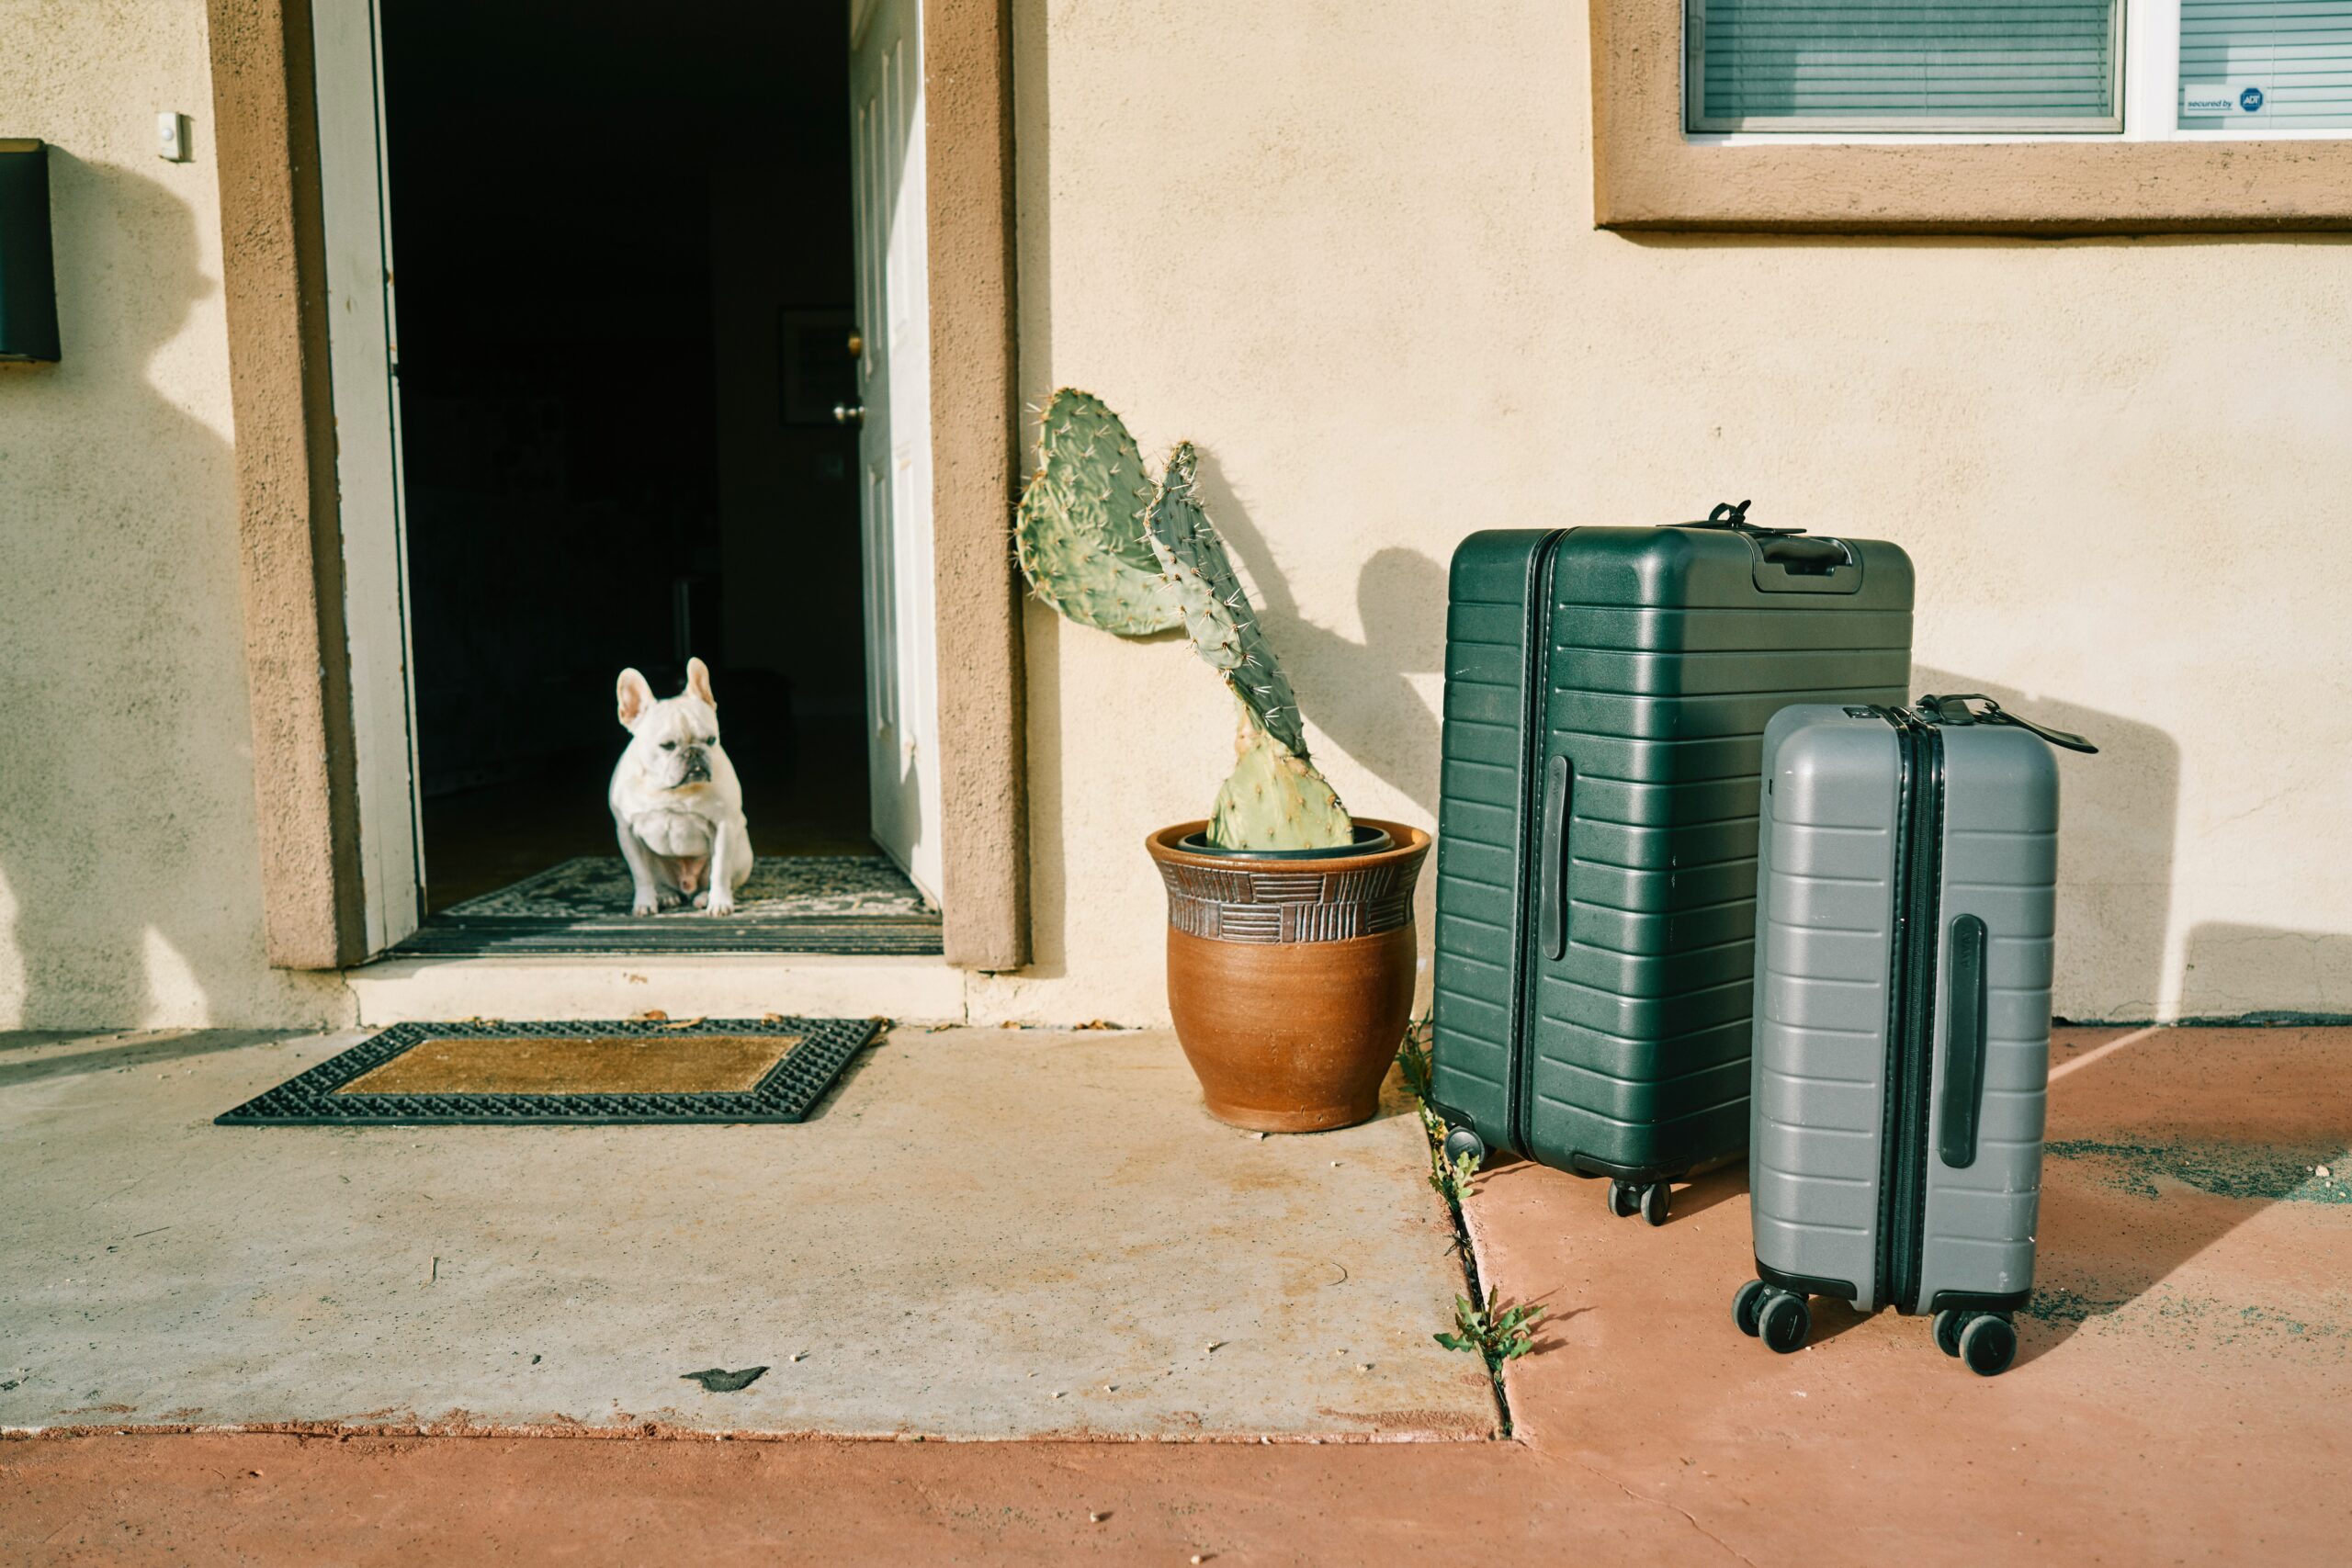 Planning Your Dog’s Care Before You Travel Without Them